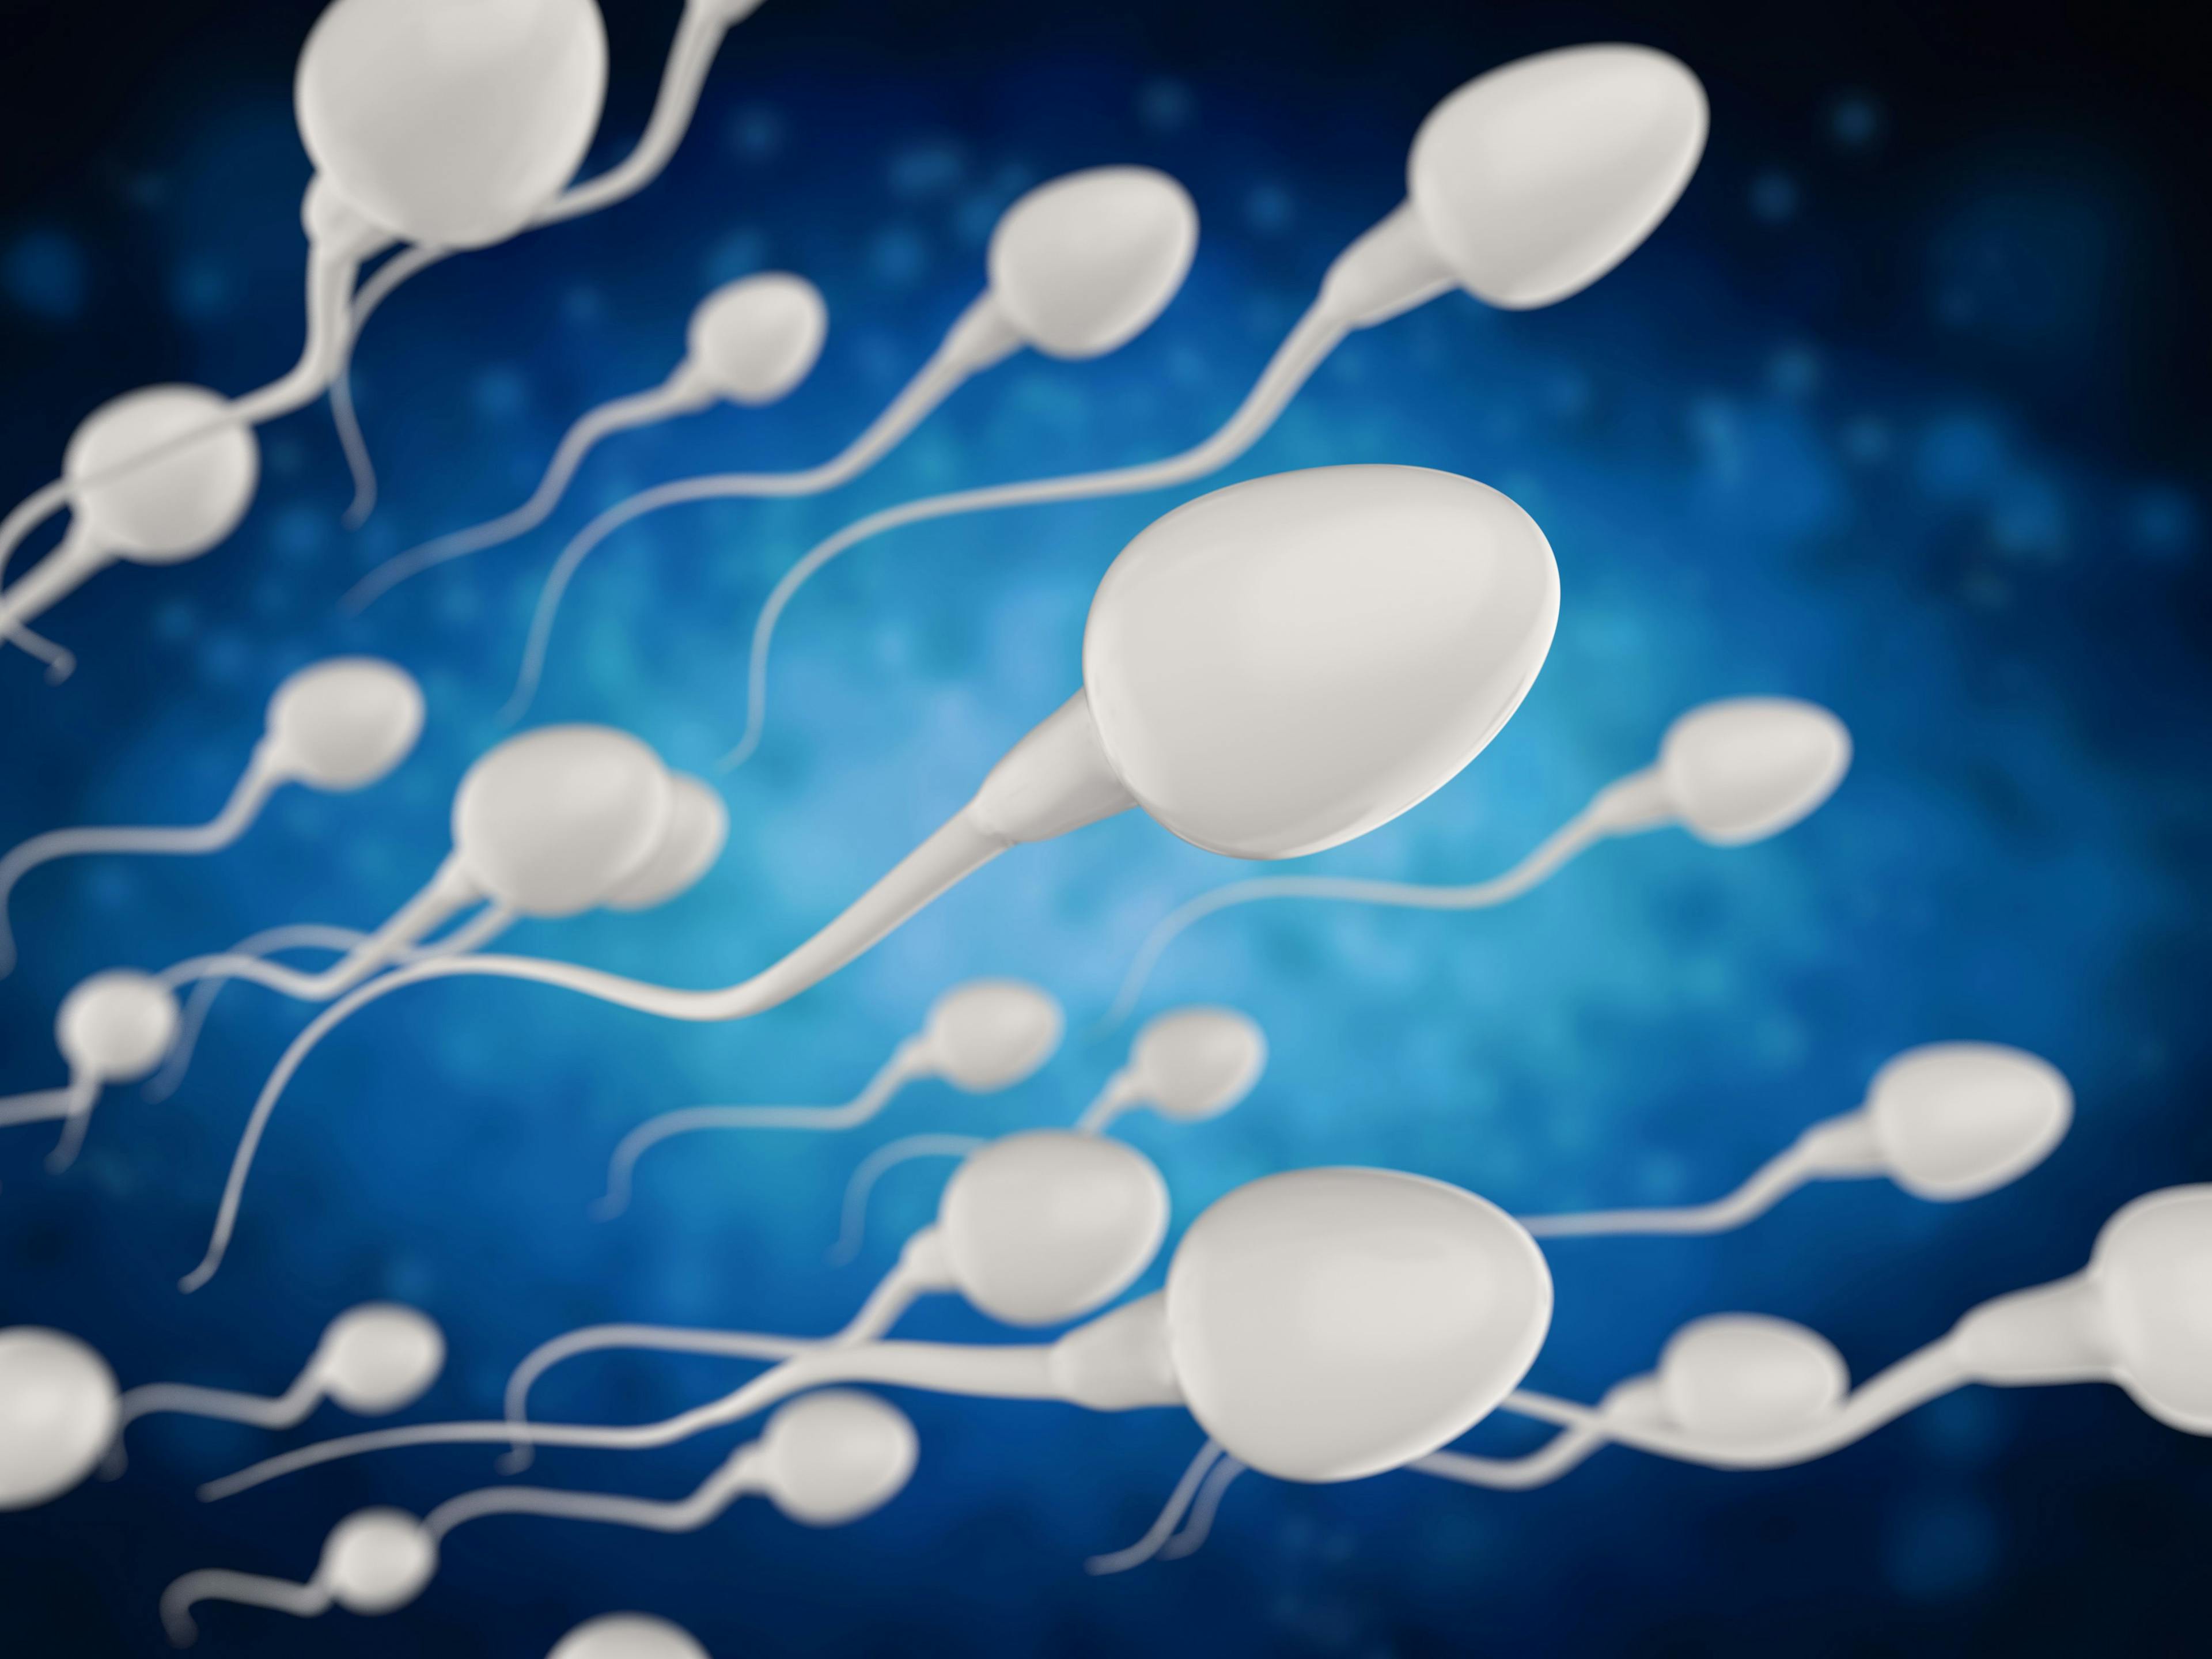 COVID-19 Associated With Decreased Sperm Concentration, Study Finds